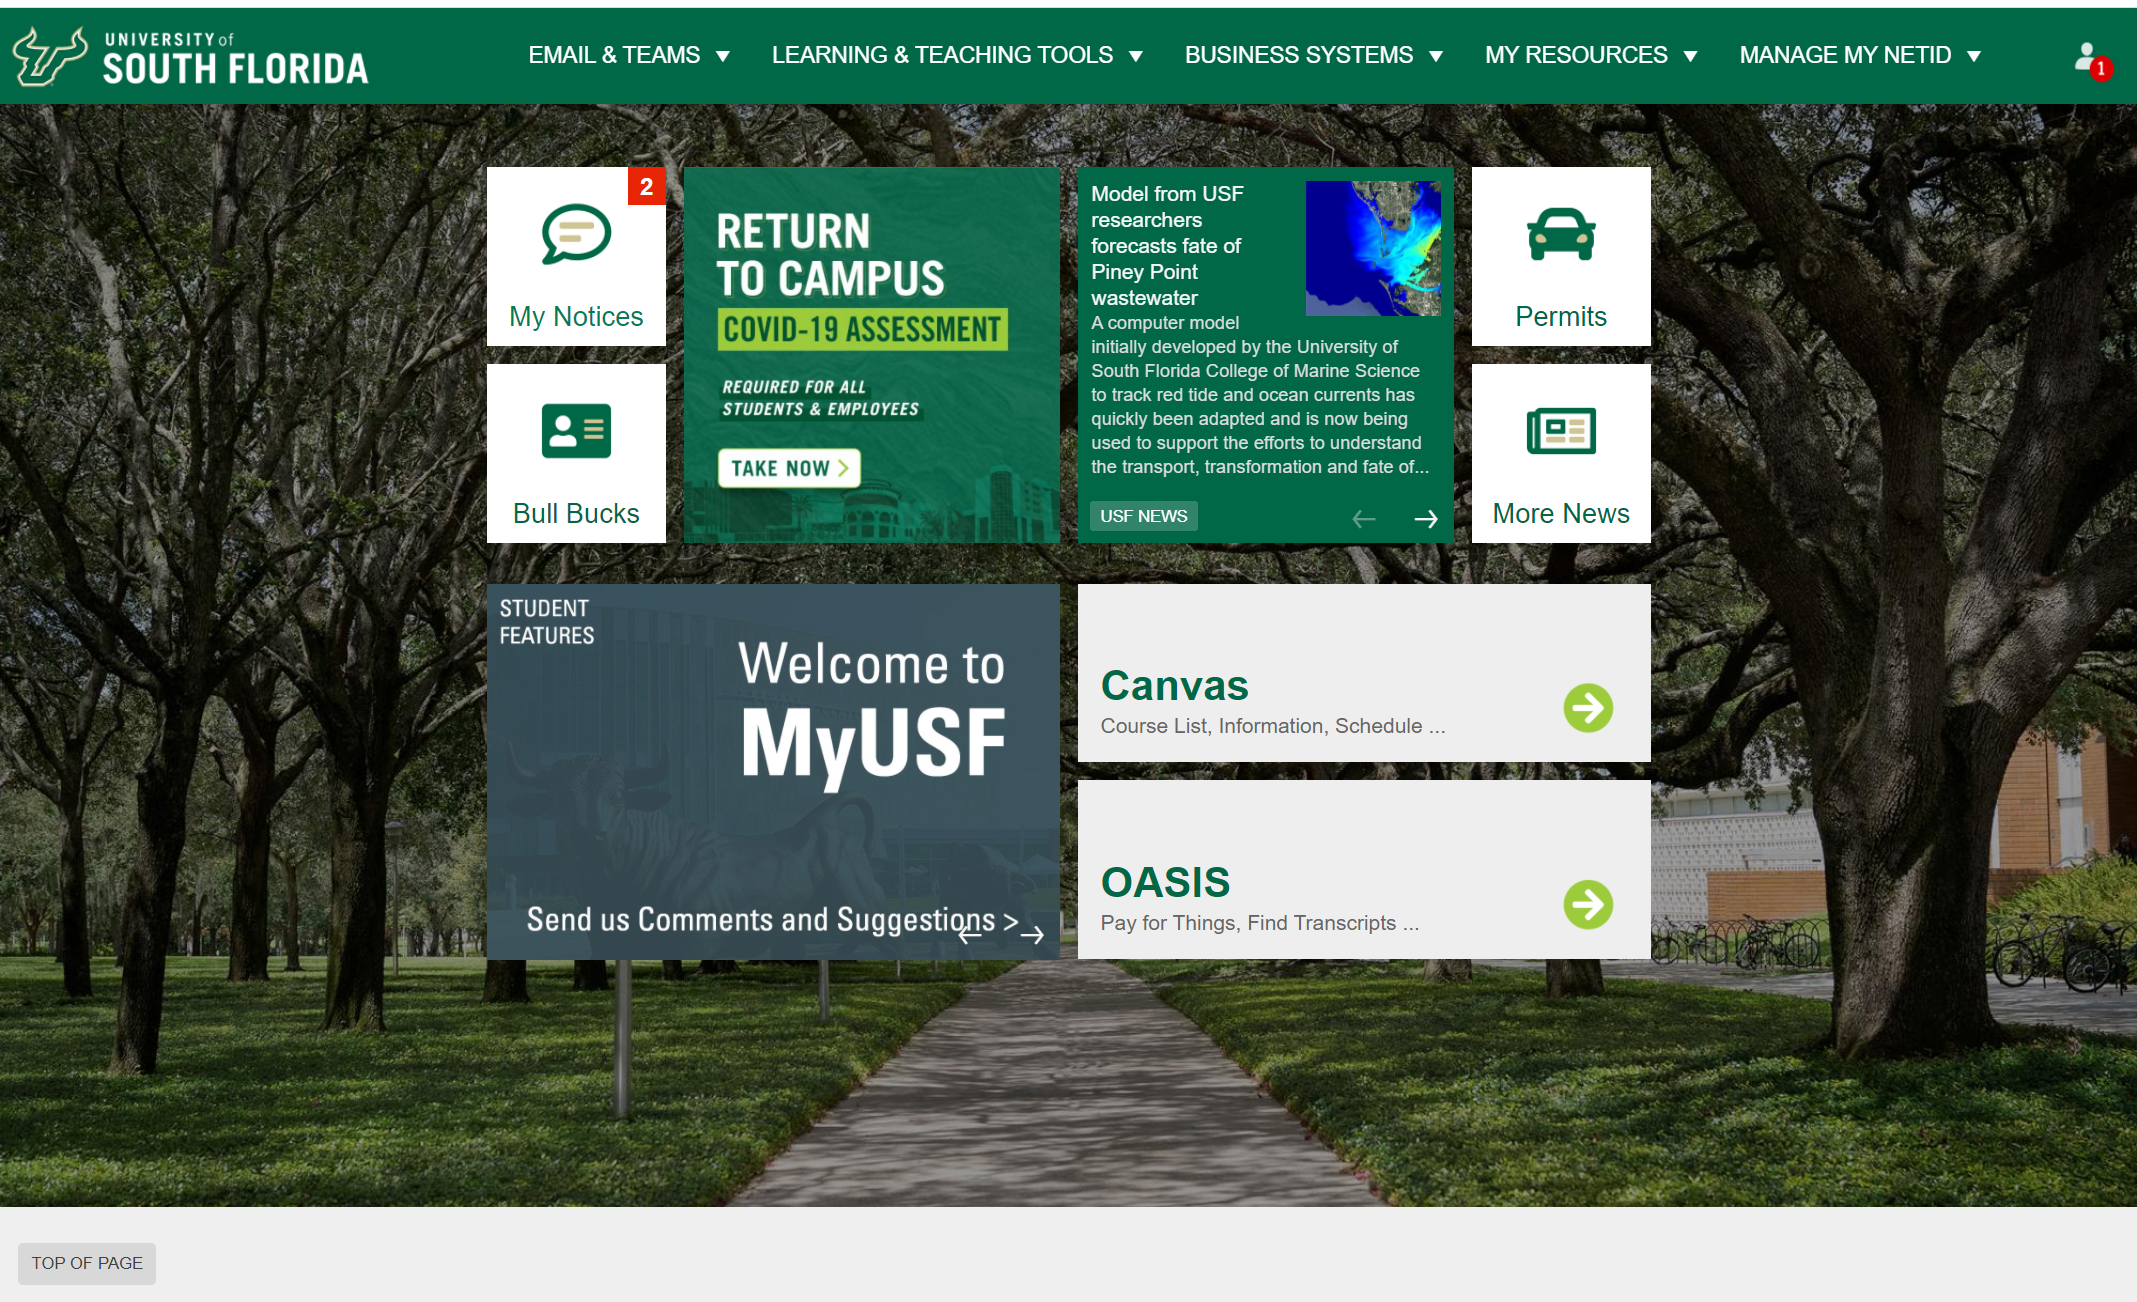 MyUSF updates to continue throughout summer and fall